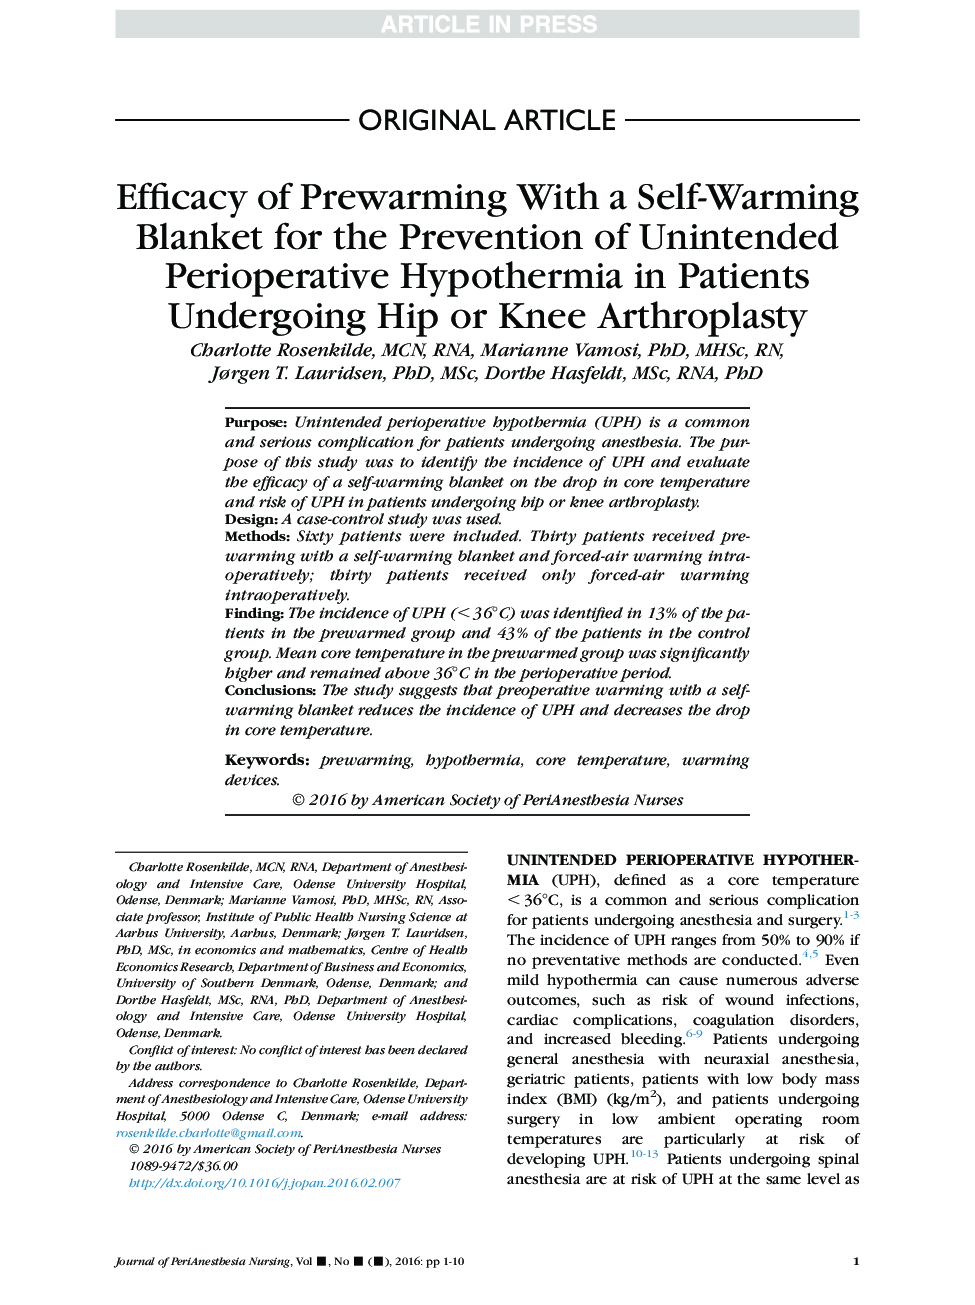 Efficacy of Prewarming With a Self-Warming Blanket for the Prevention of Unintended Perioperative Hypothermia in Patients Undergoing Hip or Knee Arthroplasty